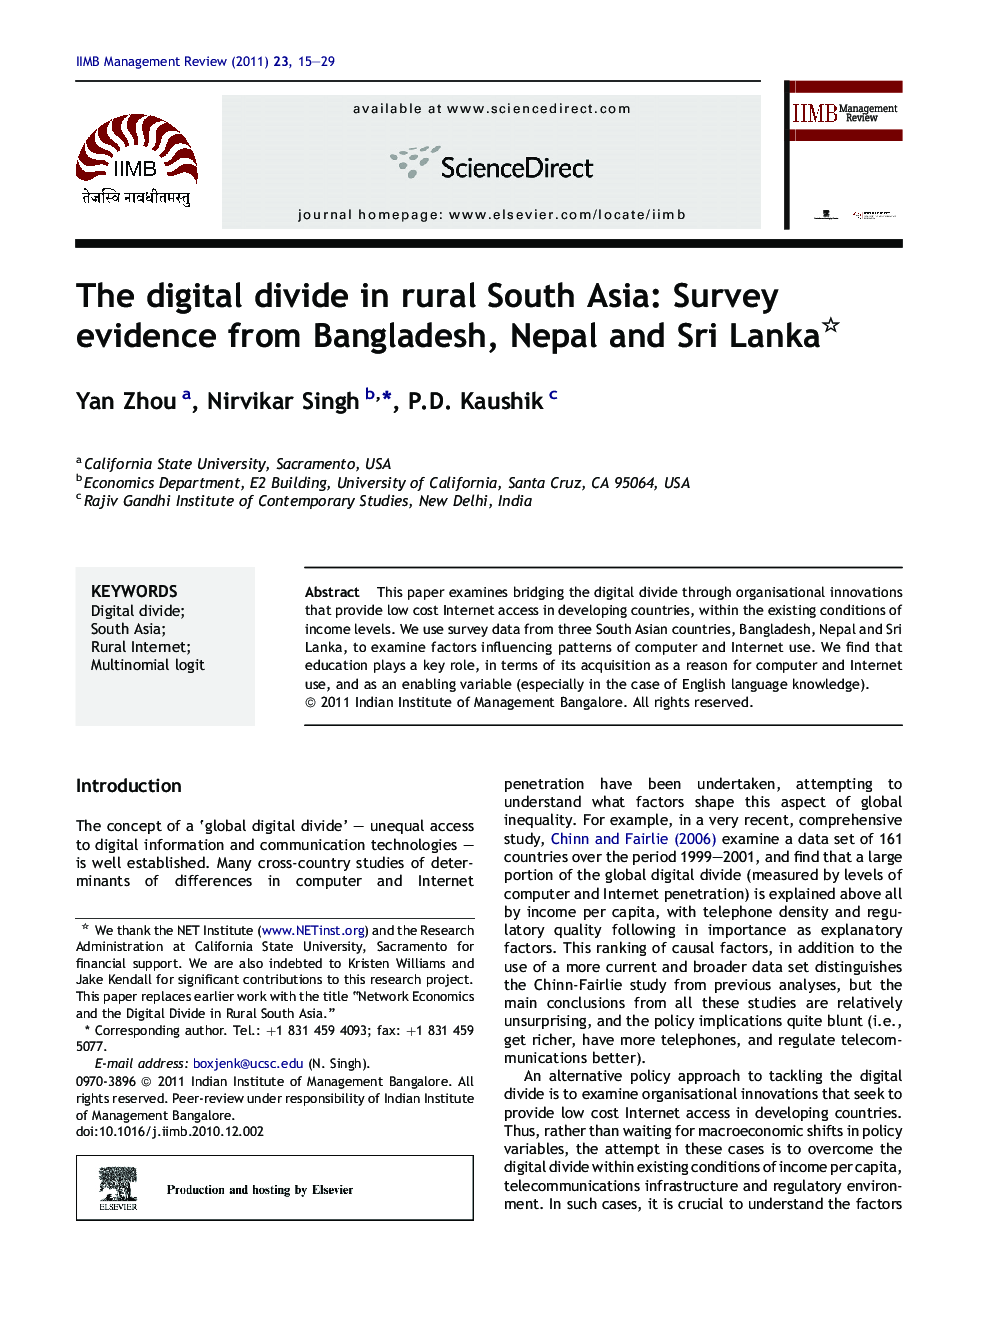 The digital divide in rural South Asia: Survey evidence from Bangladesh, Nepal and Sri Lanka 